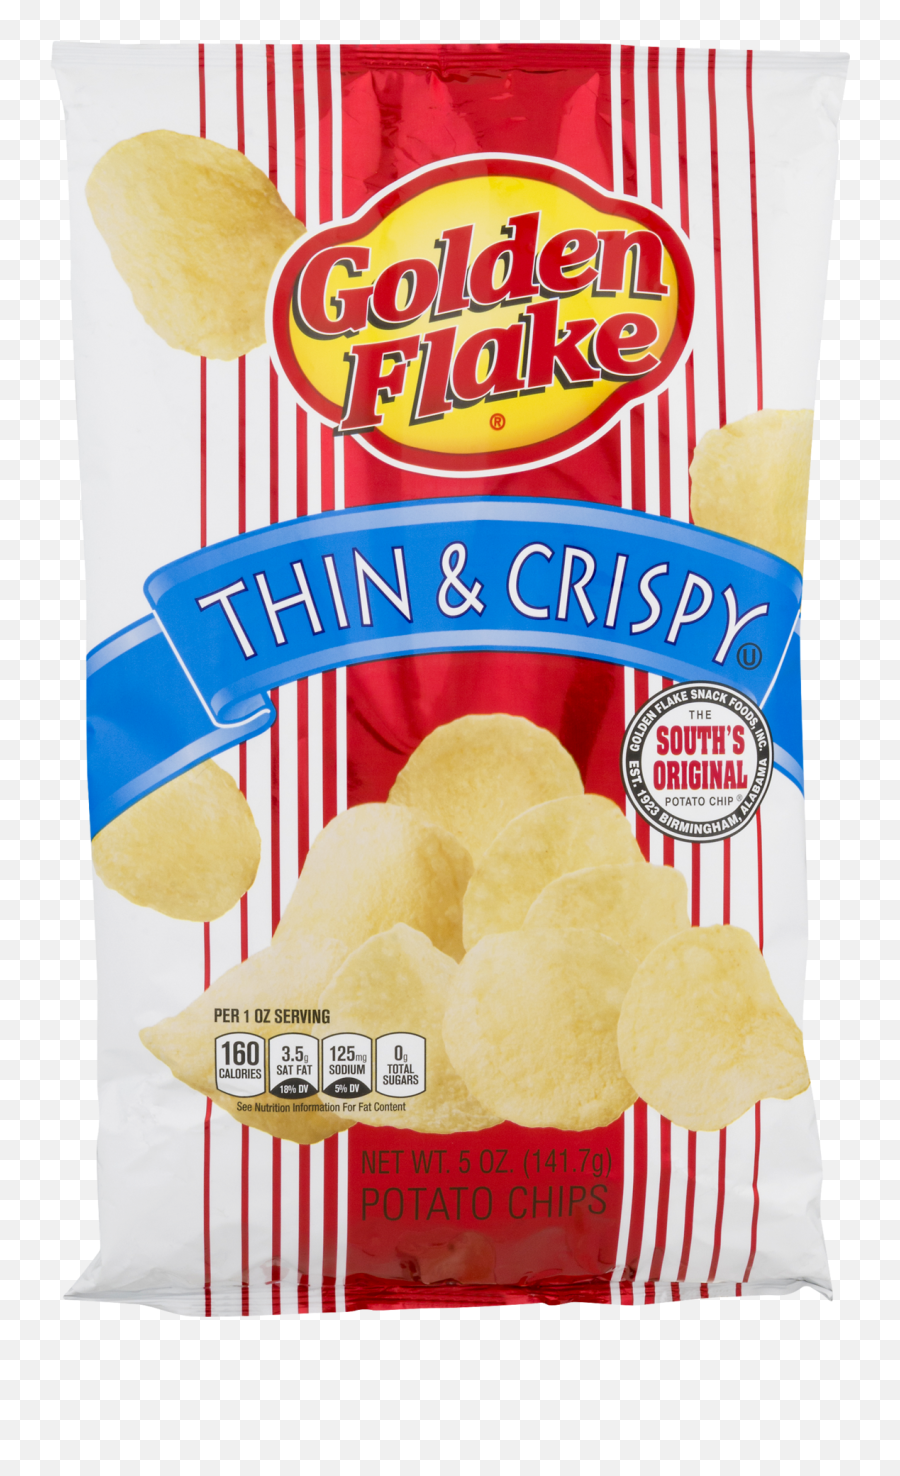 Potato Chips Png - Solid,Potato Chips Png